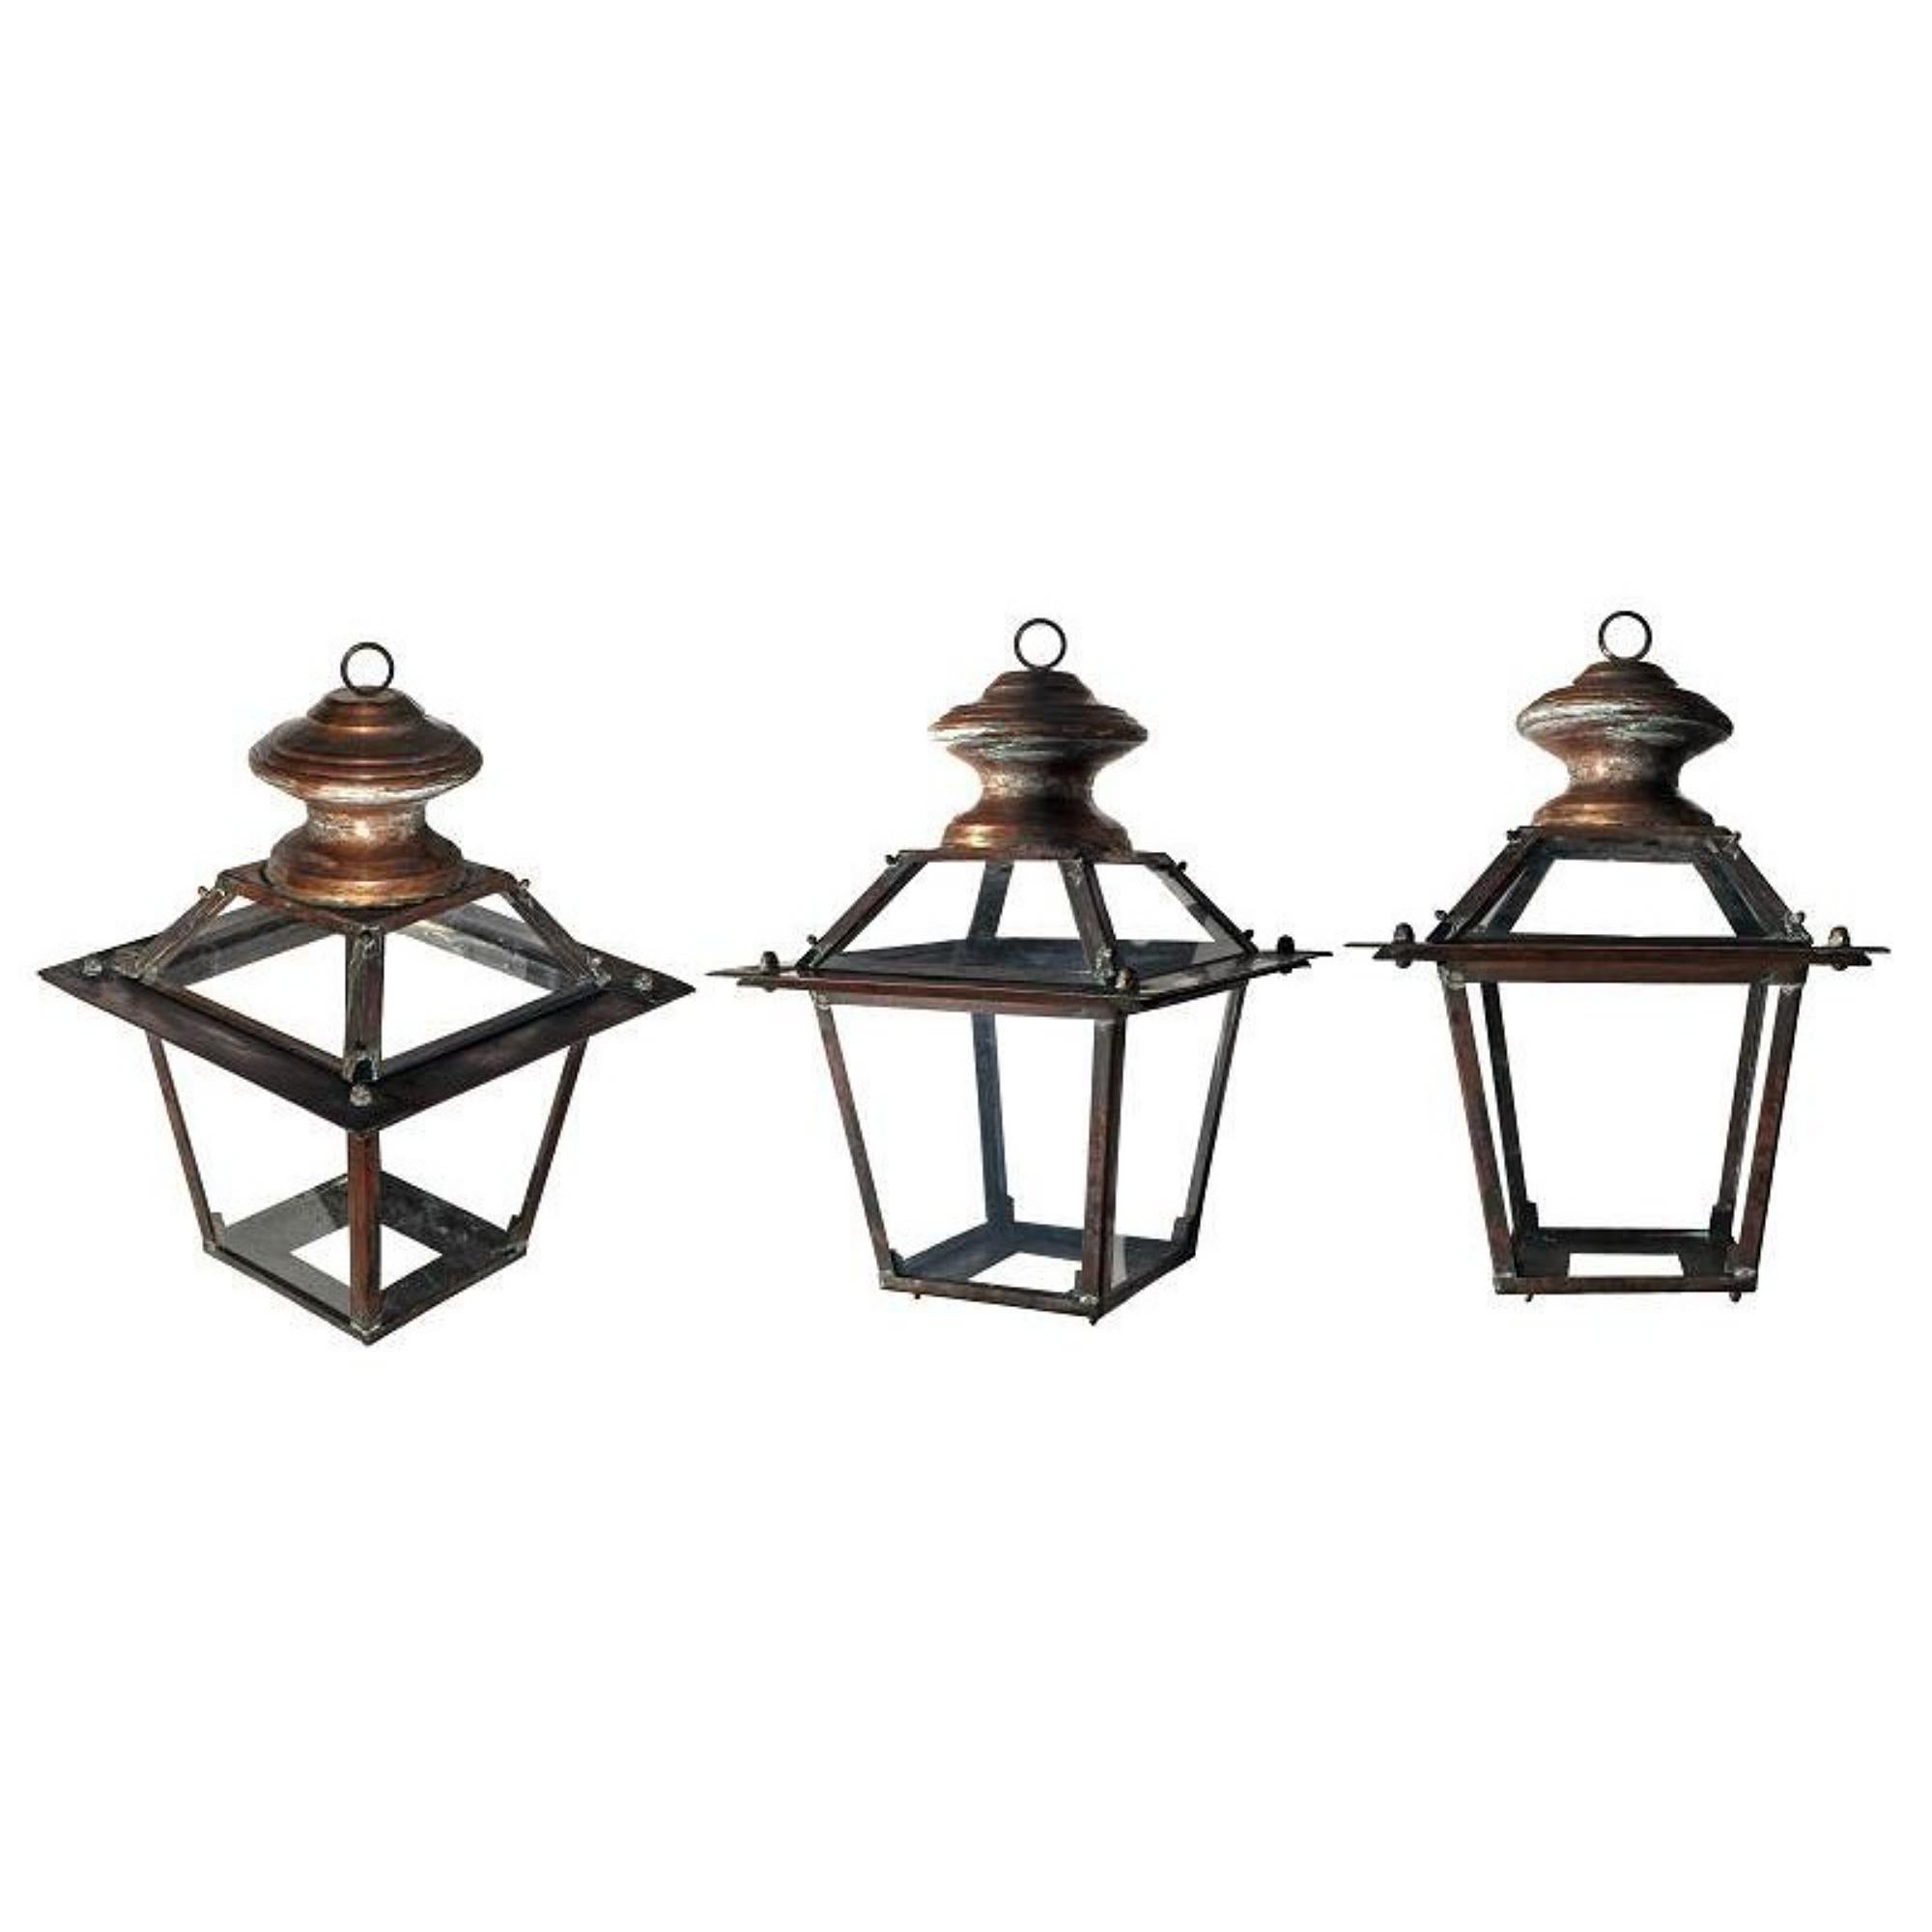 Hand-Crafted Pair of Italian Lanterns in Tuscan Copper with Ring Early 20th Century For Sale